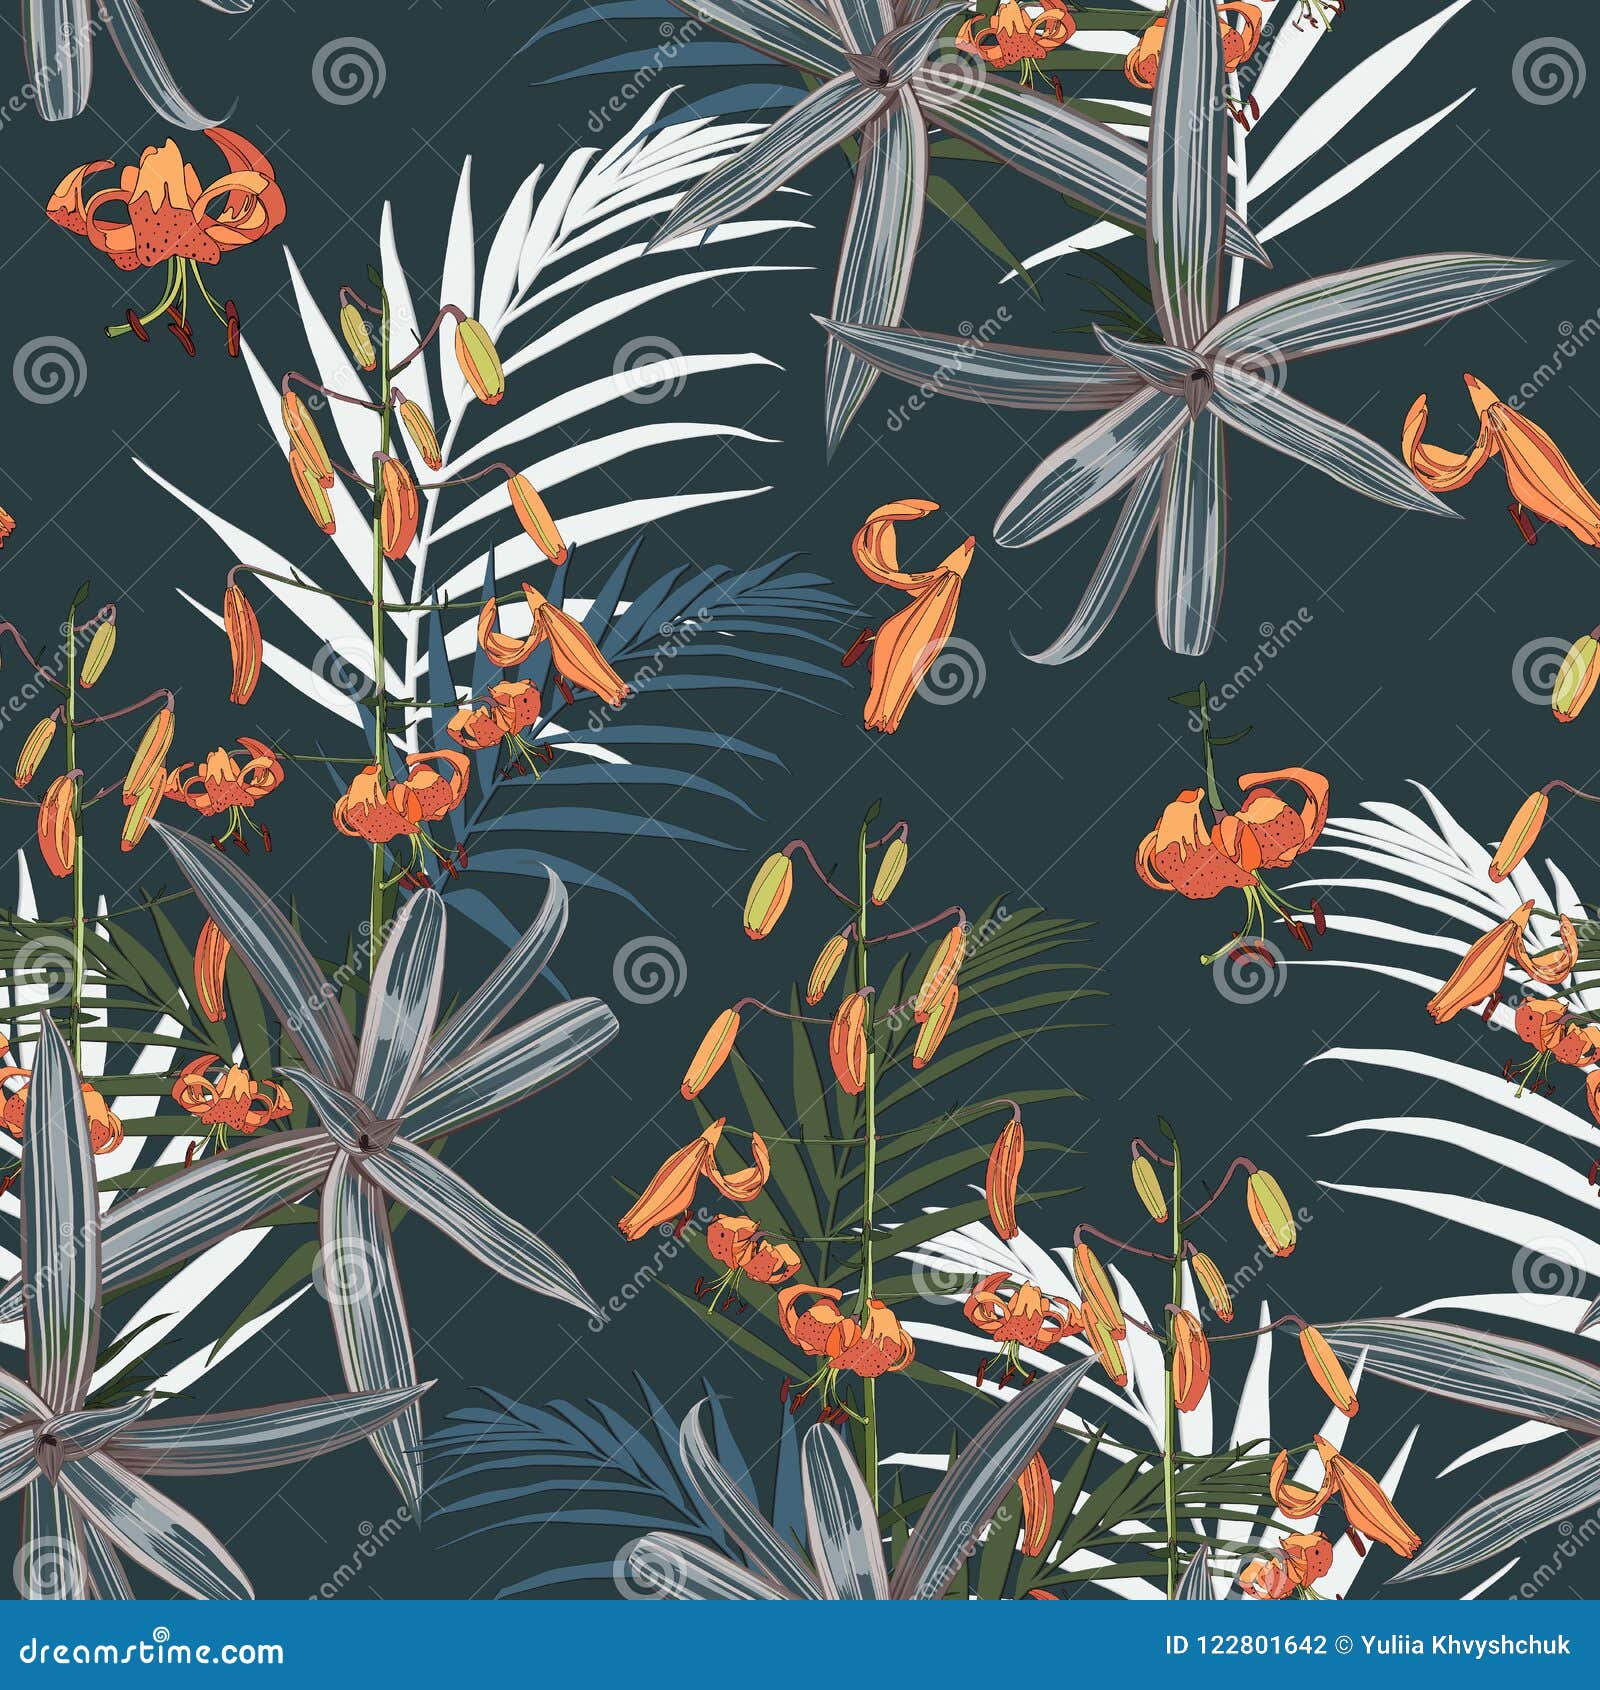 seamless pattern with exotic tropical palms and lilies flowers on the dark background.